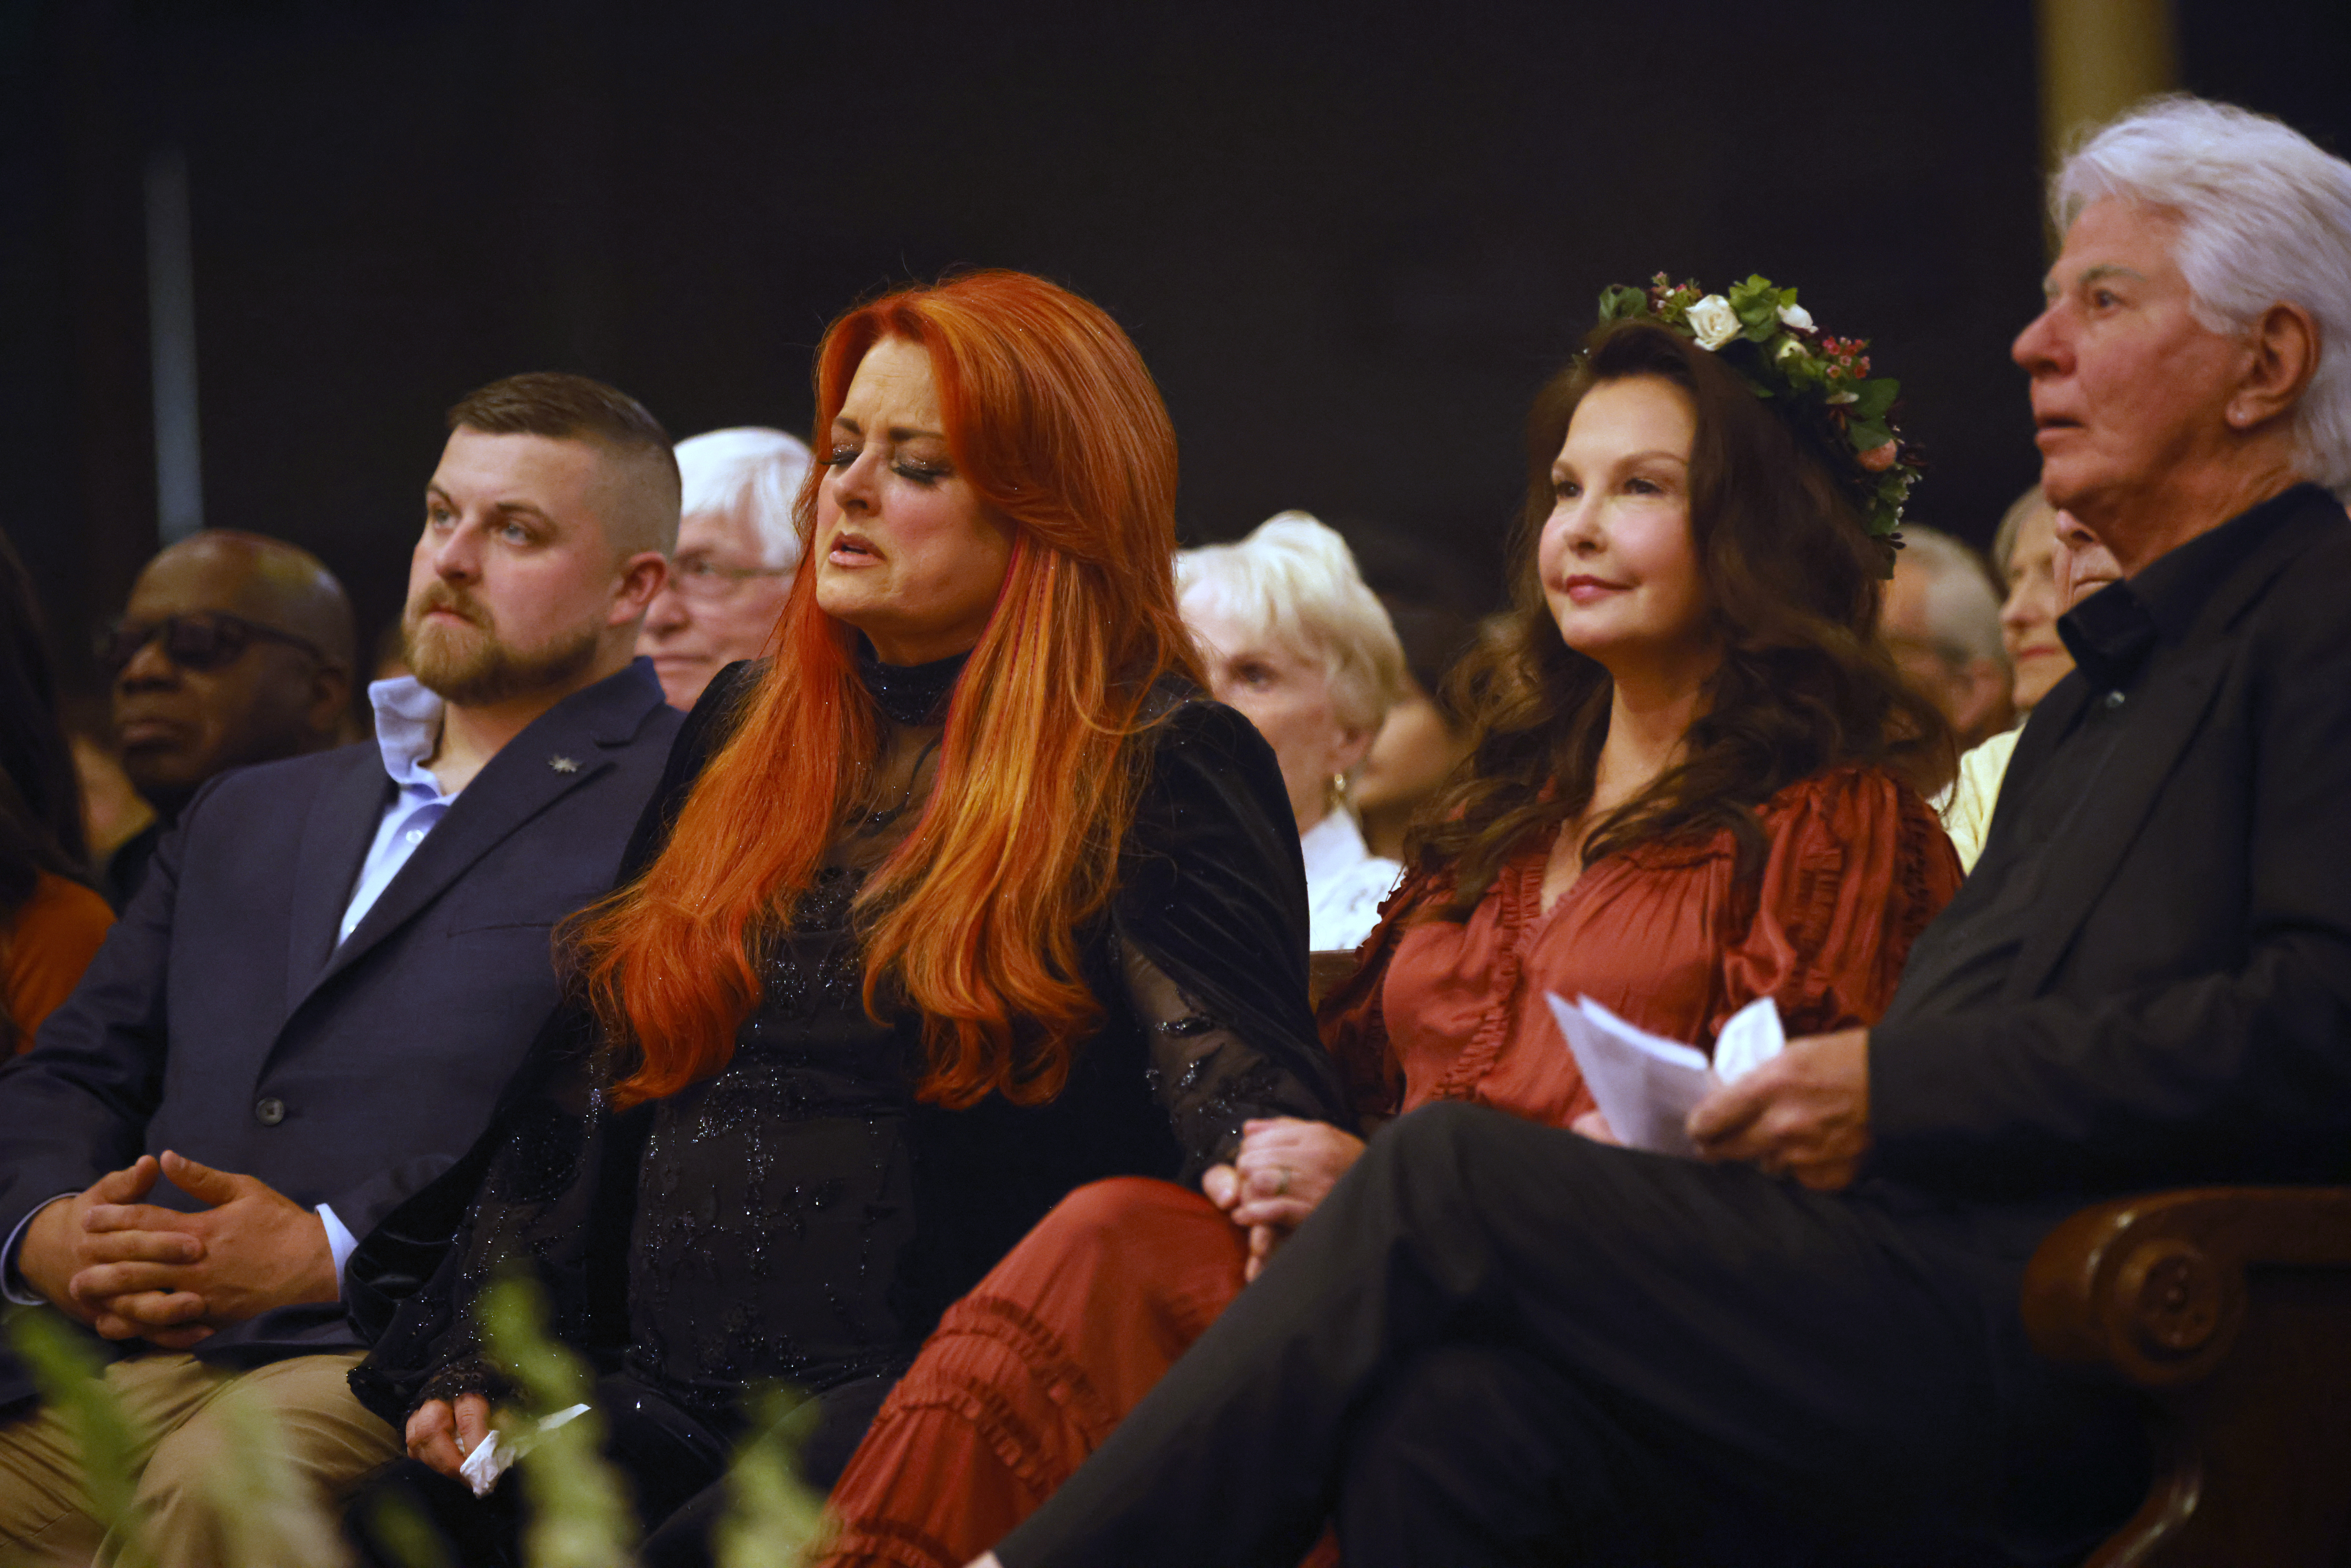 Wynonna Judd, Ashley Judd, and Larry Strickland in Nashville, Tennessee on May 15, 2022 | Source: Getty Images